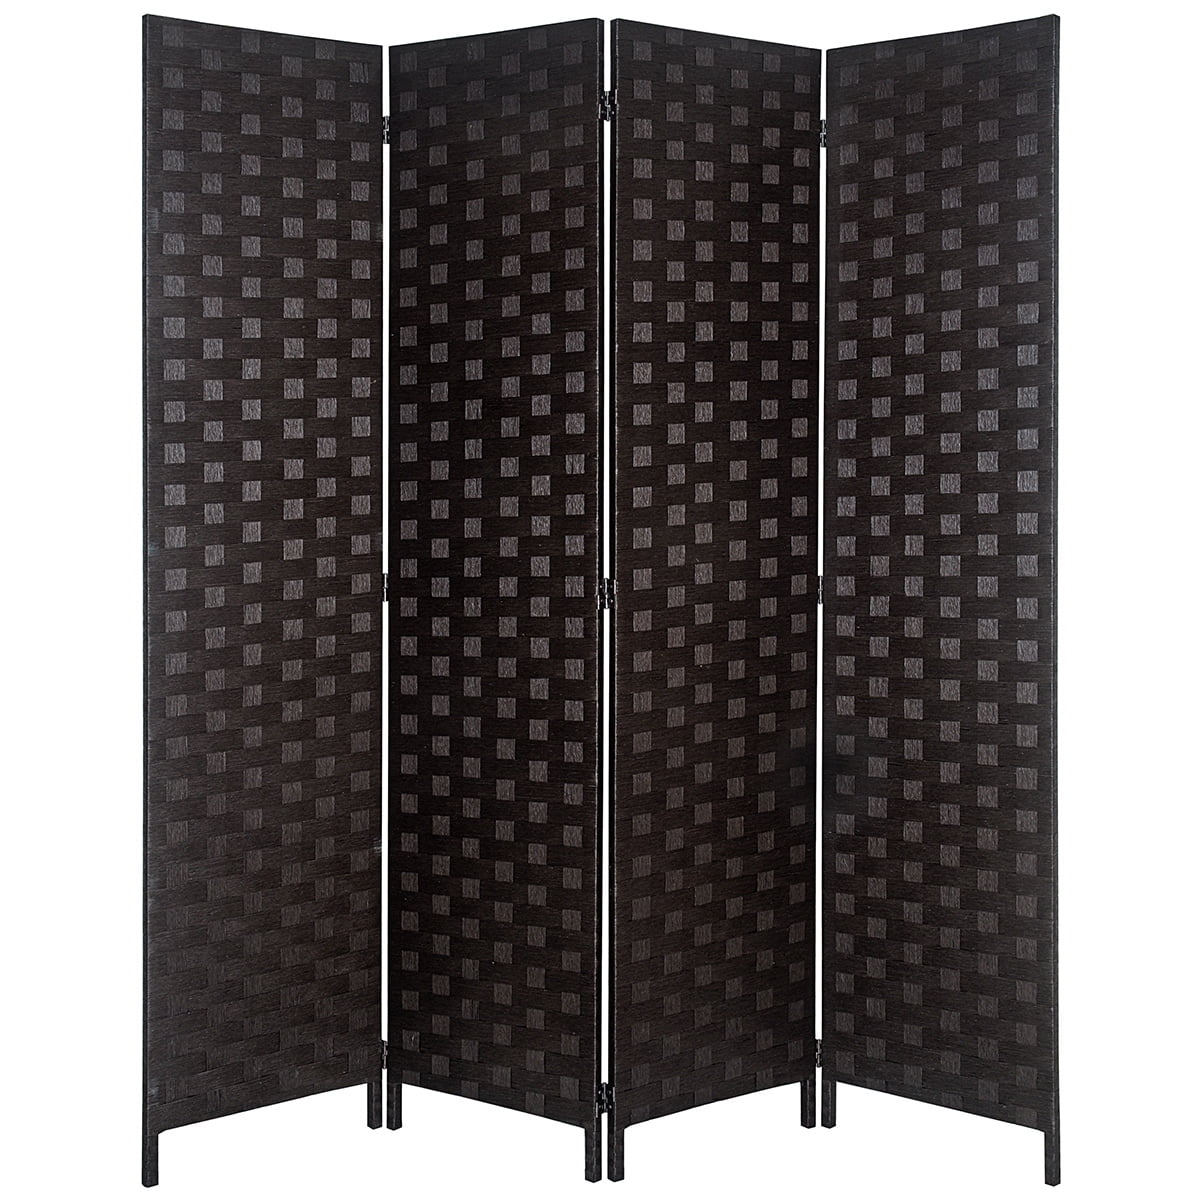 Details about   Room Divider 4 Panel Foldable Privacy Screen Fiber Double Side Freestanding Gift